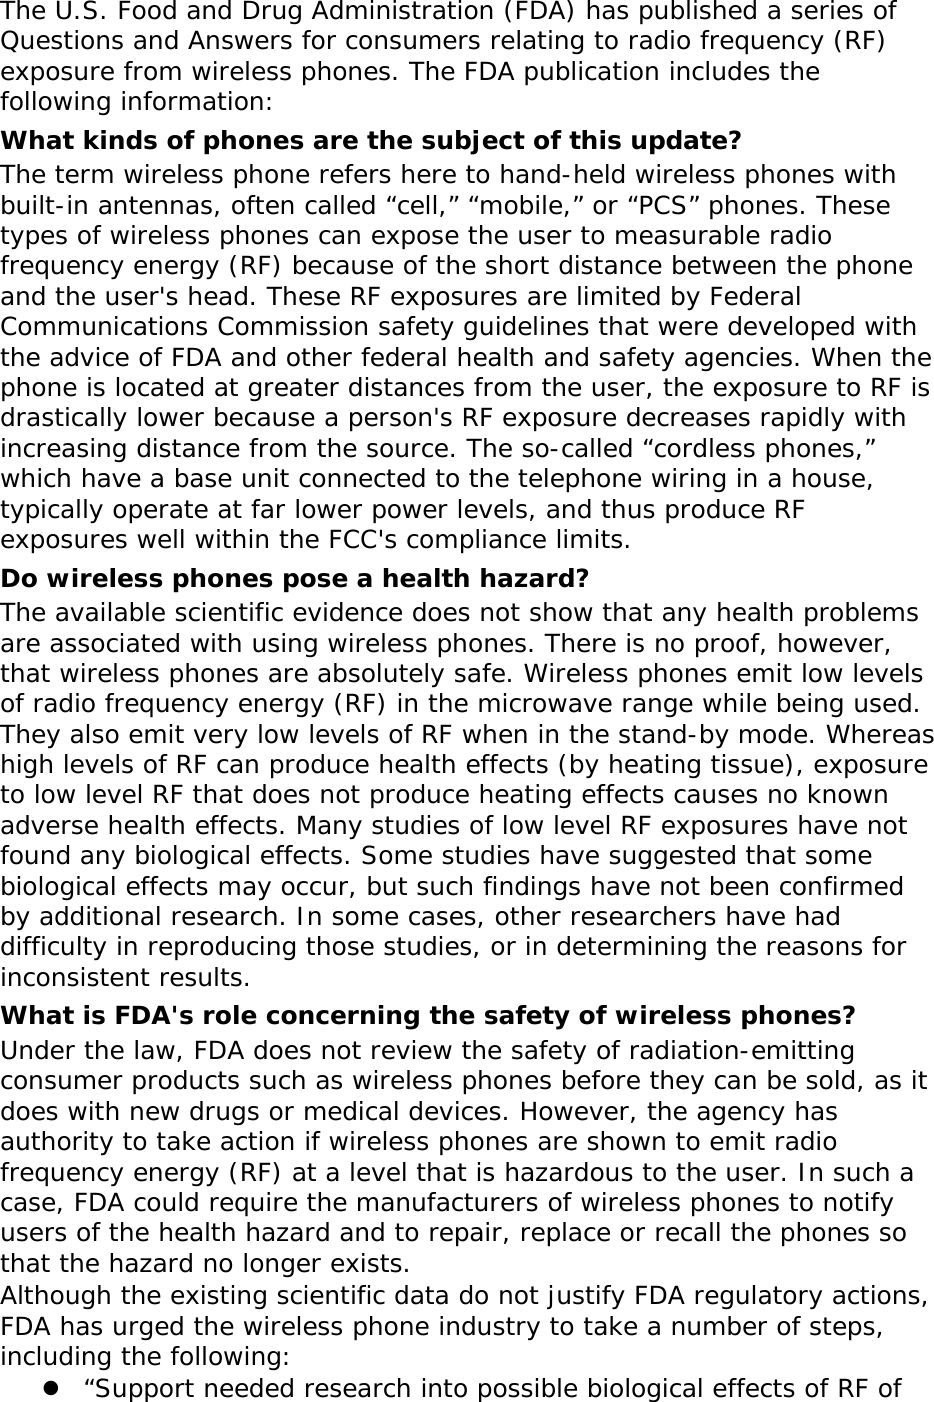 The U.S. Food and Drug Administration (FDA) has published a series of Questions and Answers for consumers relating to radio frequency (RF) exposure from wireless phones. The FDA publication includes the following information: What kinds of phones are the subject of this update? The term wireless phone refers here to hand-held wireless phones with built-in antennas, often called “cell,” “mobile,” or “PCS” phones. These types of wireless phones can expose the user to measurable radio frequency energy (RF) because of the short distance between the phone and the user&apos;s head. These RF exposures are limited by Federal Communications Commission safety guidelines that were developed with the advice of FDA and other federal health and safety agencies. When the phone is located at greater distances from the user, the exposure to RF is drastically lower because a person&apos;s RF exposure decreases rapidly with increasing distance from the source. The so-called “cordless phones,” which have a base unit connected to the telephone wiring in a house, typically operate at far lower power levels, and thus produce RF exposures well within the FCC&apos;s compliance limits. Do wireless phones pose a health hazard? The available scientific evidence does not show that any health problems are associated with using wireless phones. There is no proof, however, that wireless phones are absolutely safe. Wireless phones emit low levels of radio frequency energy (RF) in the microwave range while being used. They also emit very low levels of RF when in the stand-by mode. Whereas high levels of RF can produce health effects (by heating tissue), exposure to low level RF that does not produce heating effects causes no known adverse health effects. Many studies of low level RF exposures have not found any biological effects. Some studies have suggested that some biological effects may occur, but such findings have not been confirmed by additional research. In some cases, other researchers have had difficulty in reproducing those studies, or in determining the reasons for inconsistent results. What is FDA&apos;s role concerning the safety of wireless phones? Under the law, FDA does not review the safety of radiation-emitting consumer products such as wireless phones before they can be sold, as it does with new drugs or medical devices. However, the agency has authority to take action if wireless phones are shown to emit radio frequency energy (RF) at a level that is hazardous to the user. In such a case, FDA could require the manufacturers of wireless phones to notify users of the health hazard and to repair, replace or recall the phones so that the hazard no longer exists. Although the existing scientific data do not justify FDA regulatory actions, FDA has urged the wireless phone industry to take a number of steps, including the following:  “Support needed research into possible biological effects of RF of 